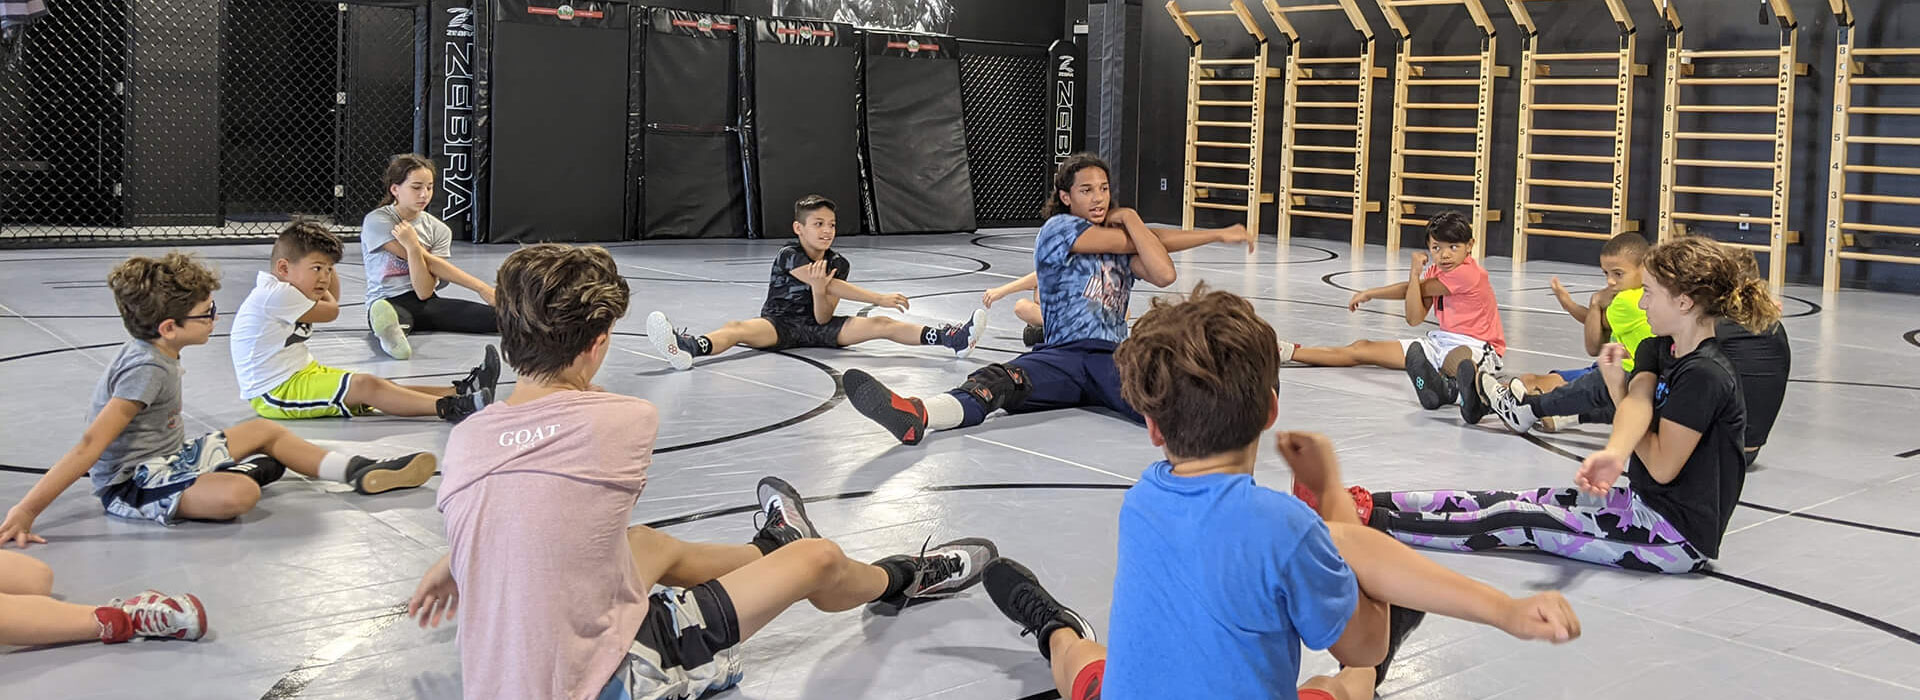 A Wrestling Academy Near George Washington University That Can Help You Lose Weight and Get Fit